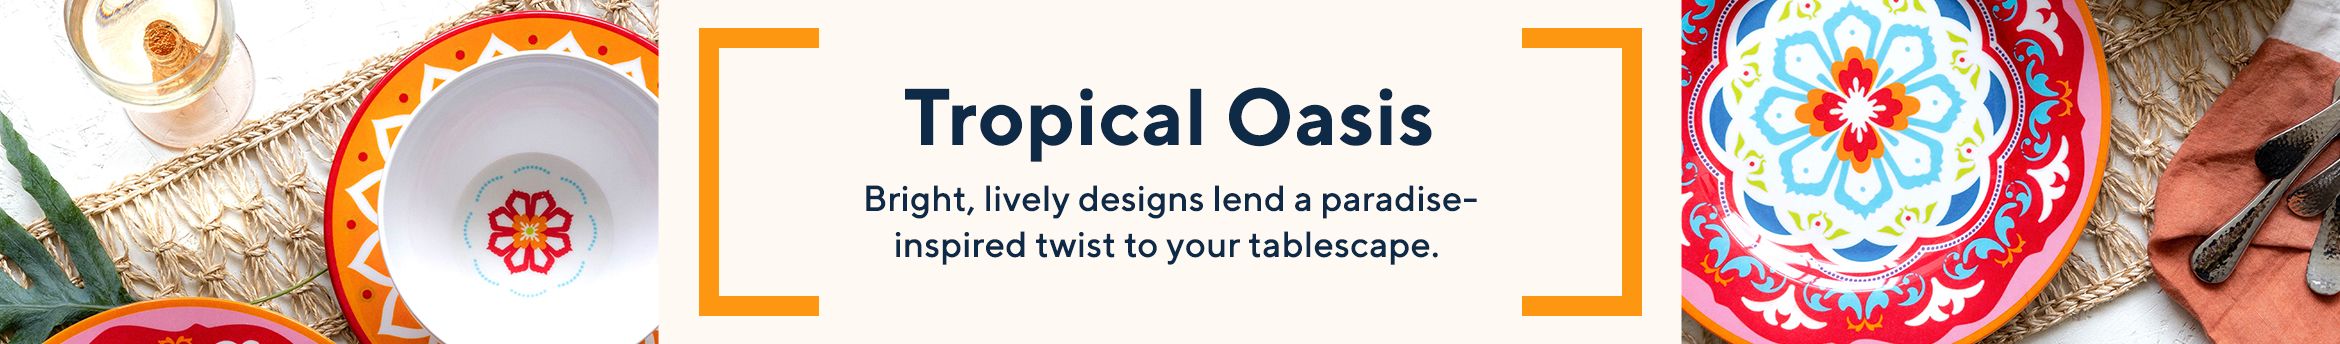 Tropical Oasis  Bright, lively designs lend a paradise-inspired twist to your tablescape. 